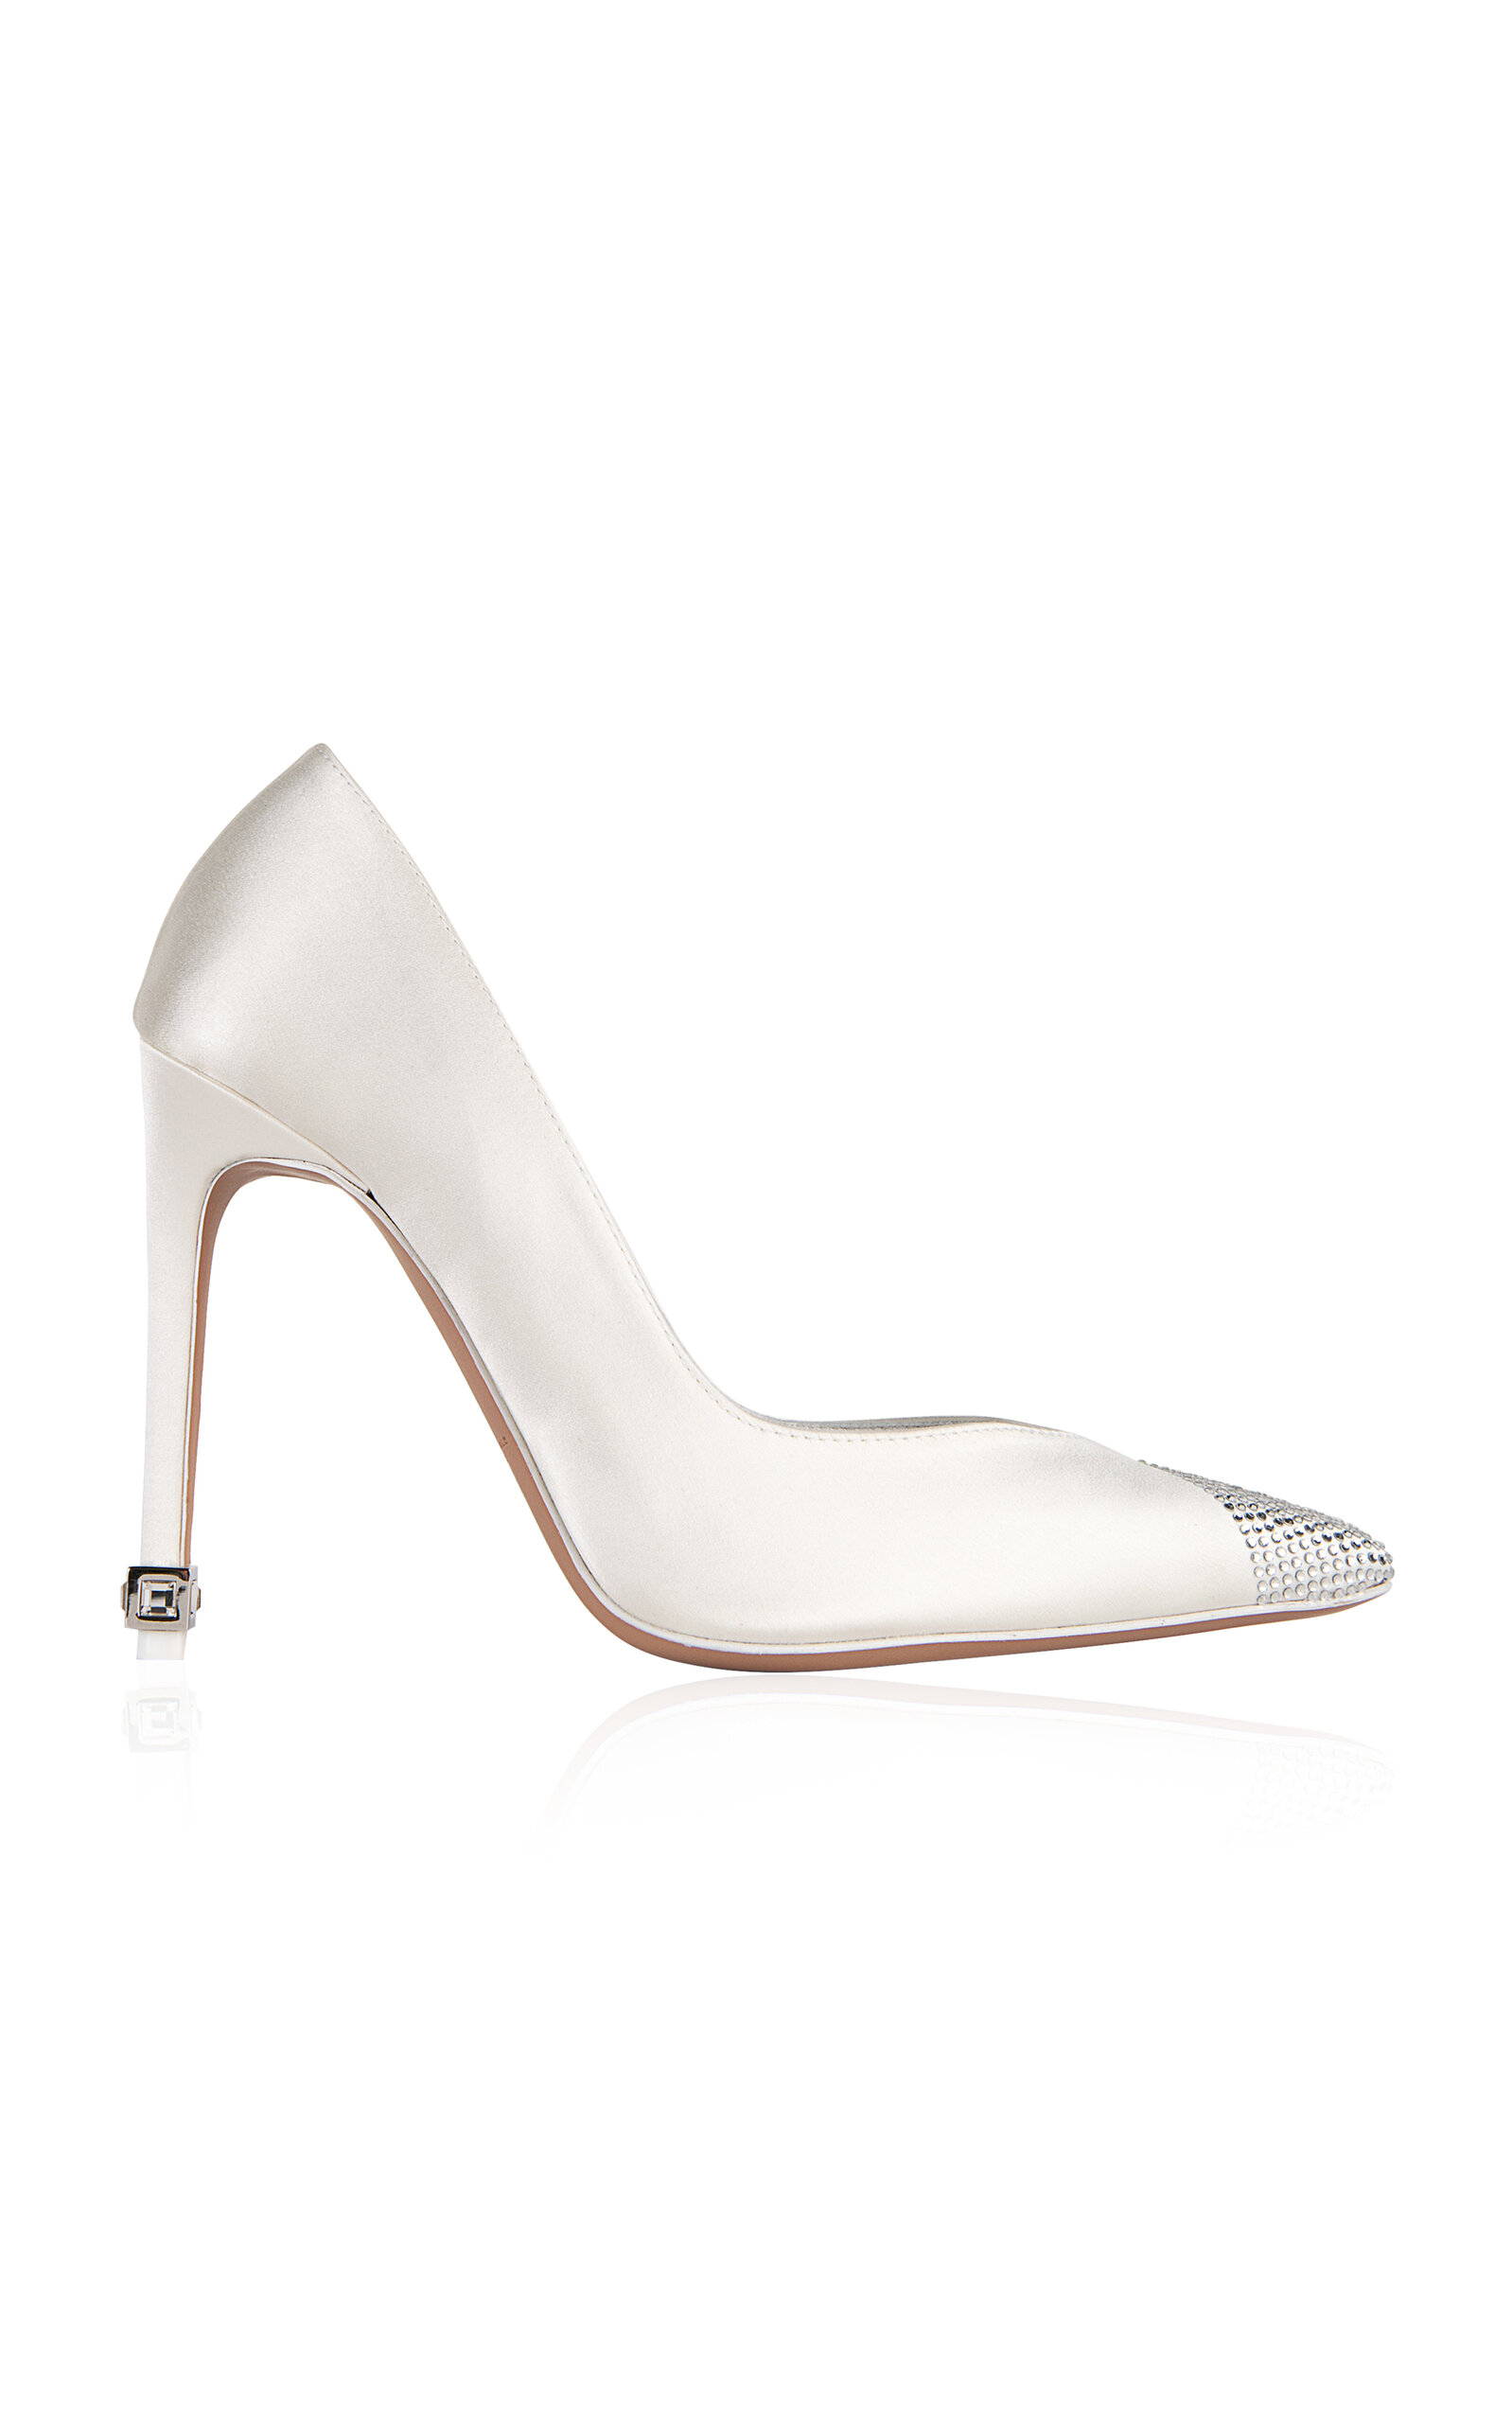 The New Arrivals Ilkyaz Ozel Crystal-toe Silk Satin Pumps In White